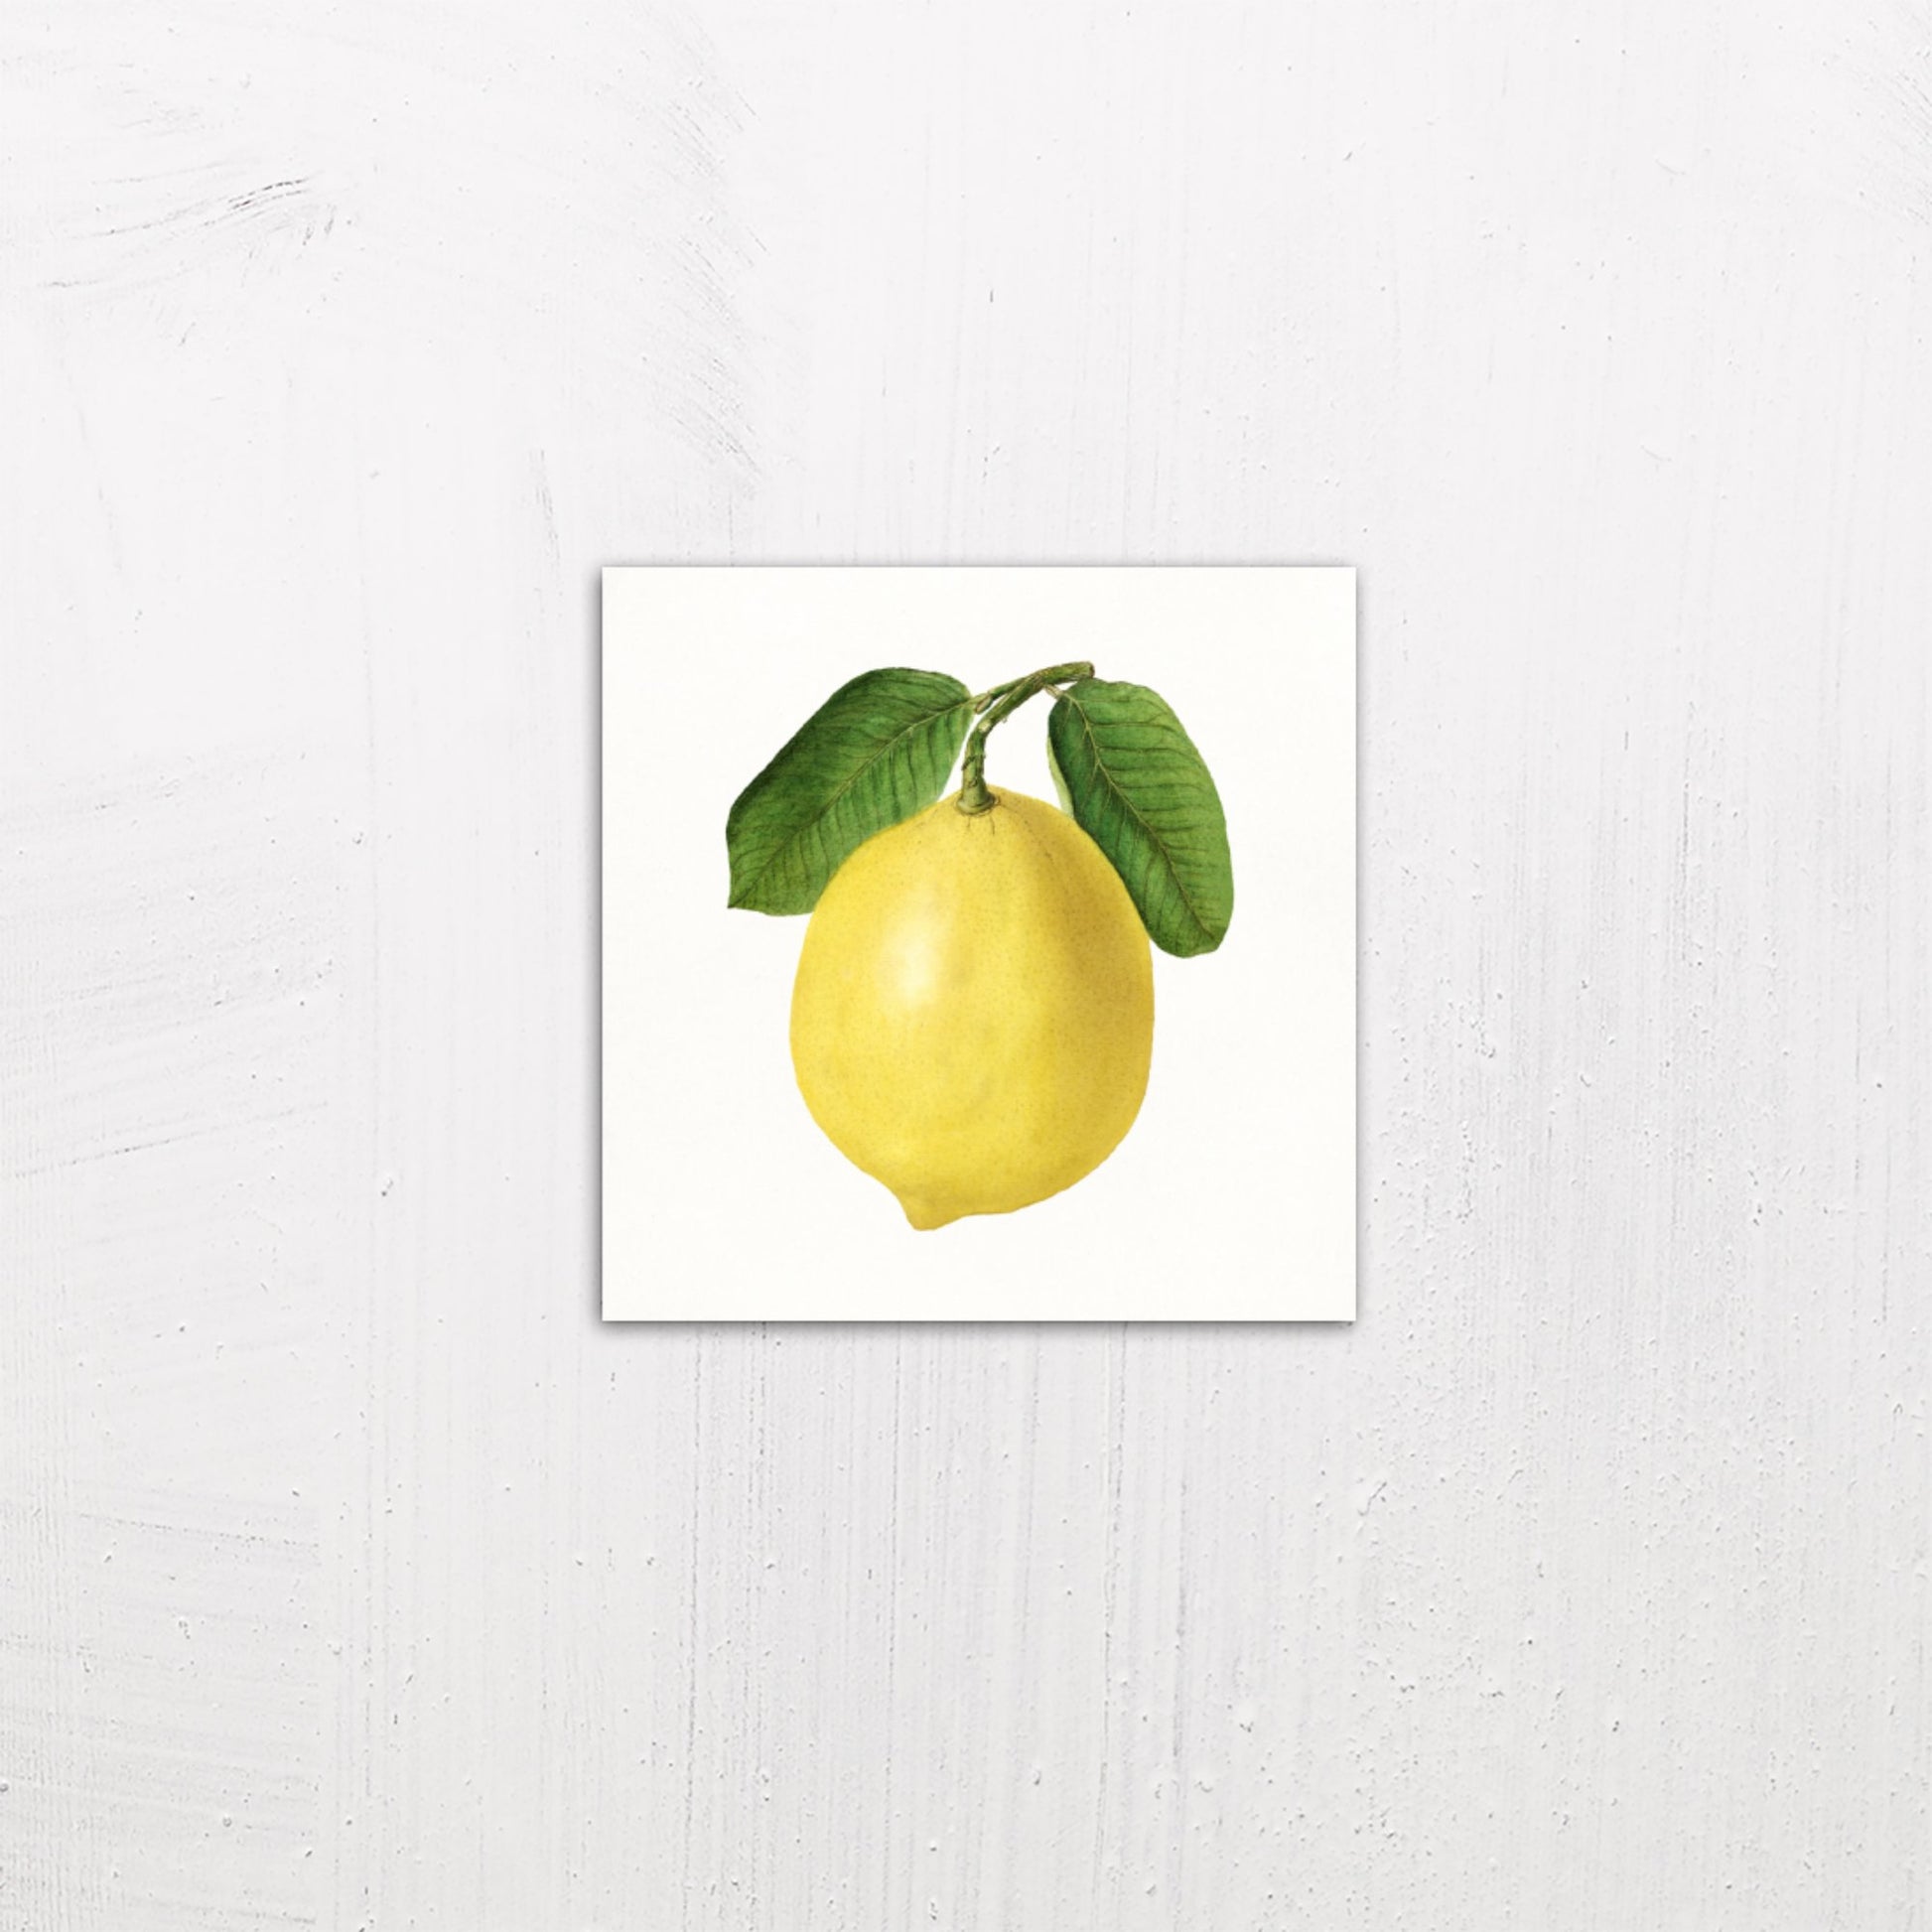 A small size metal art poster display plate with printed design of a Vintage Lemon Illustration by Ellen Isham Schutt (1910)